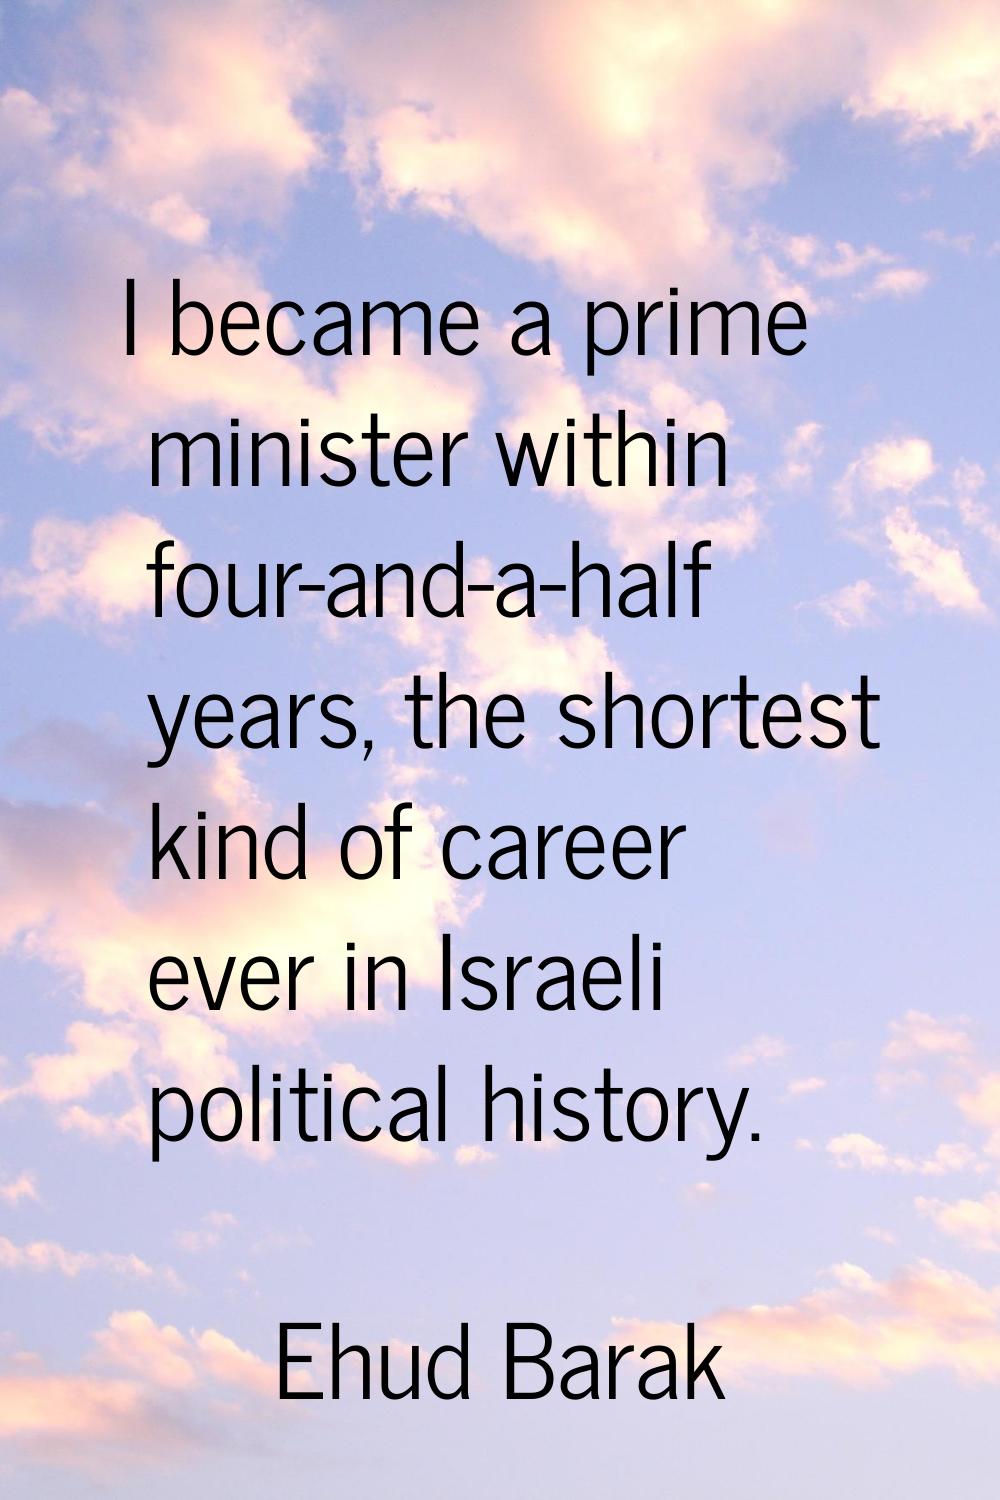 I became a prime minister within four-and-a-half years, the shortest kind of career ever in Israeli